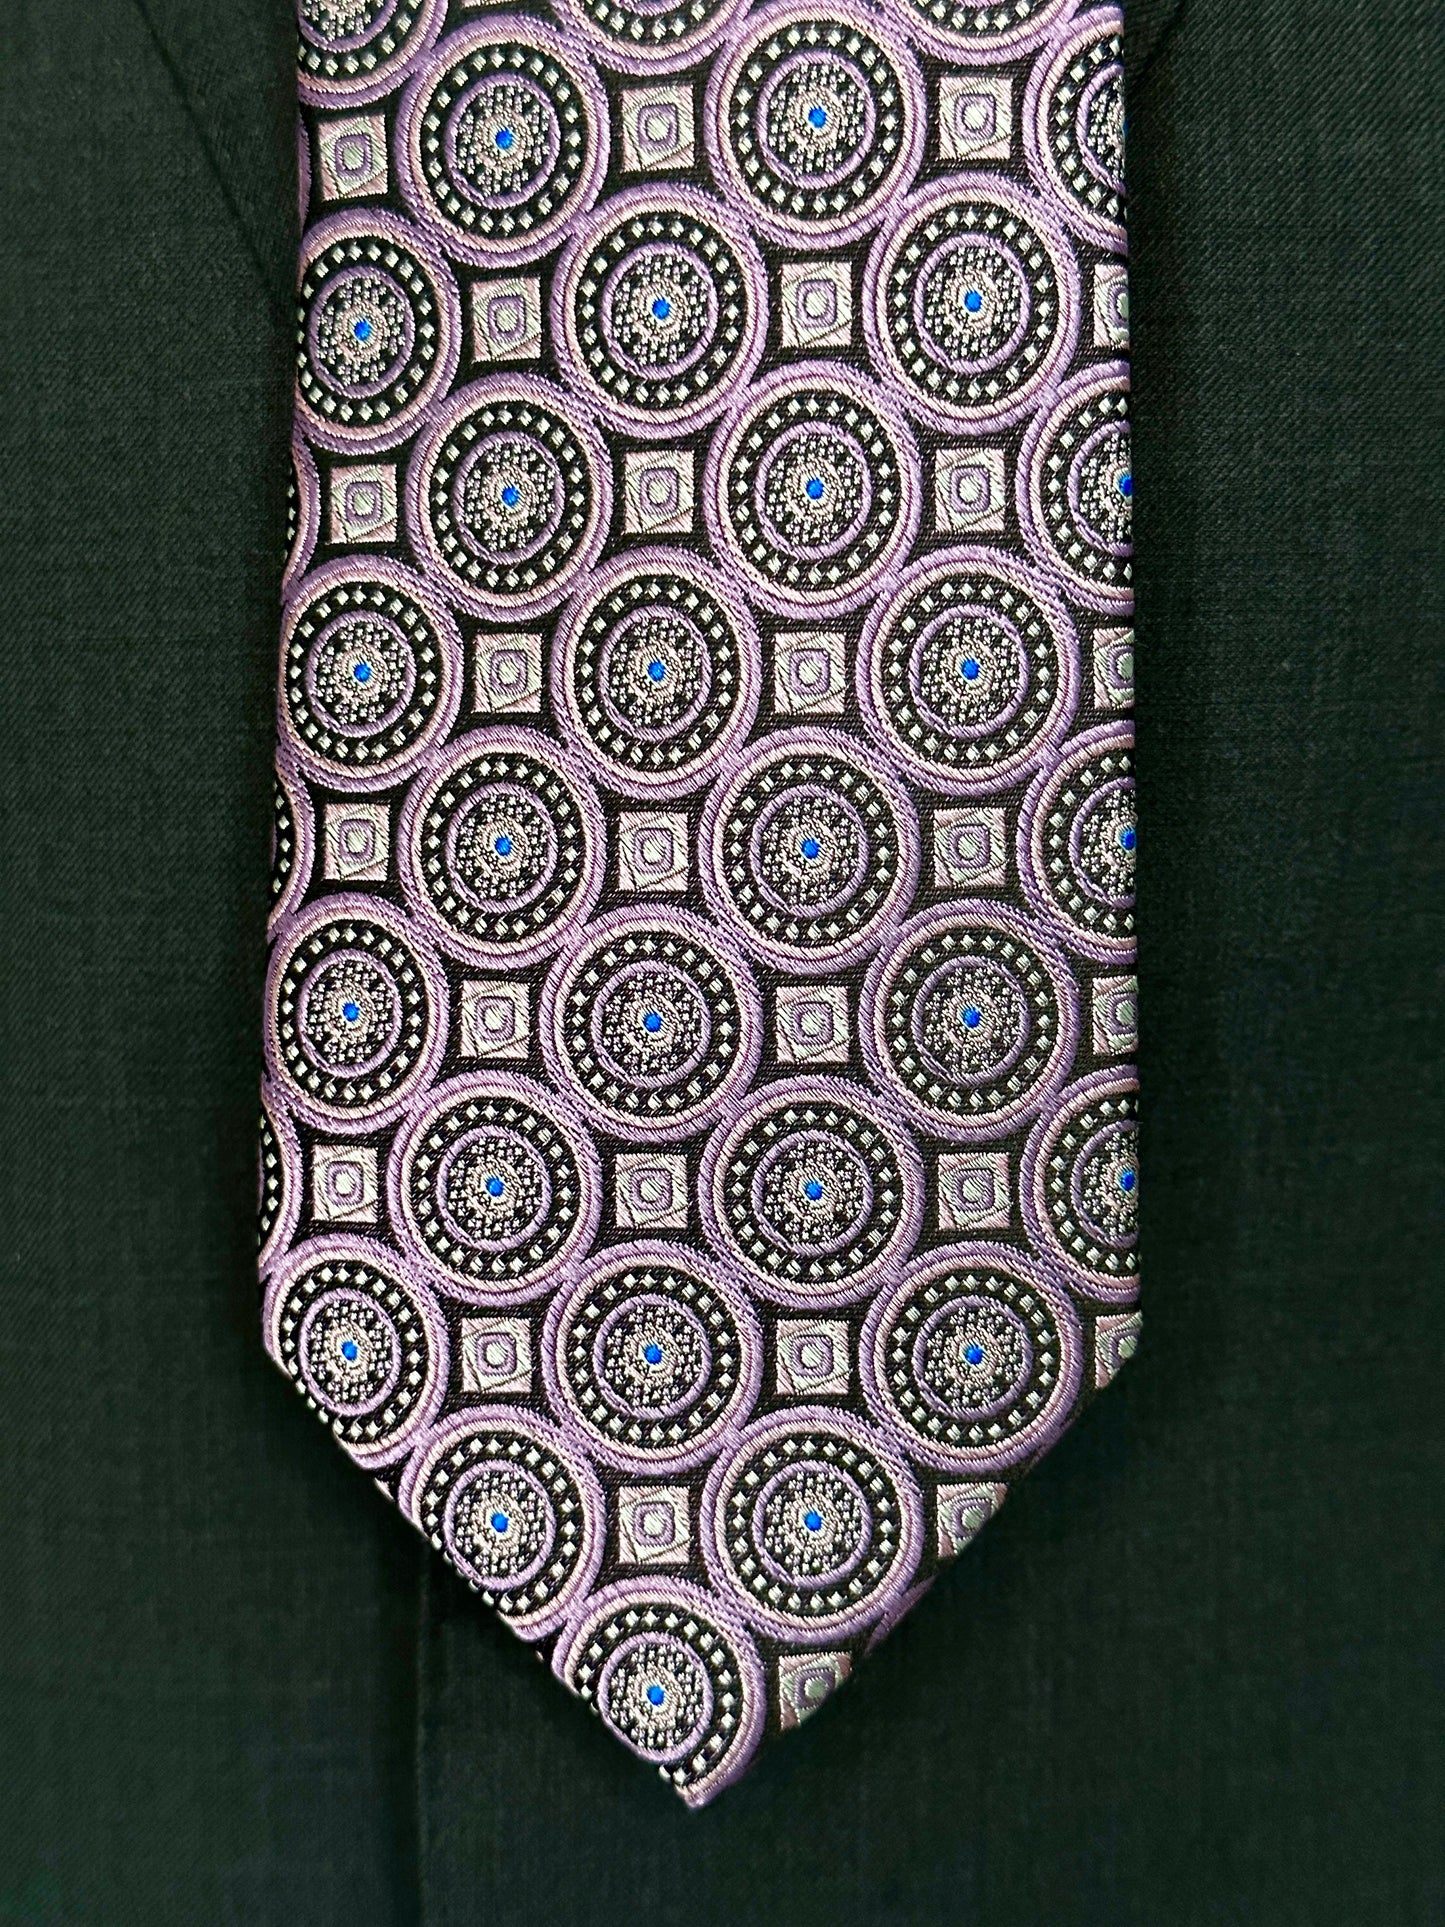 This 100% woven silk tie has a gorgeous weight and thickness to the finish. With woven medallions in shades of purple and black, this is a necktie that makes a statement. To be worn with shirts in white, blue, pink, beige and grey. This tie also pairs well with shirts with small plaids and mini checks. See the sister color in blue.